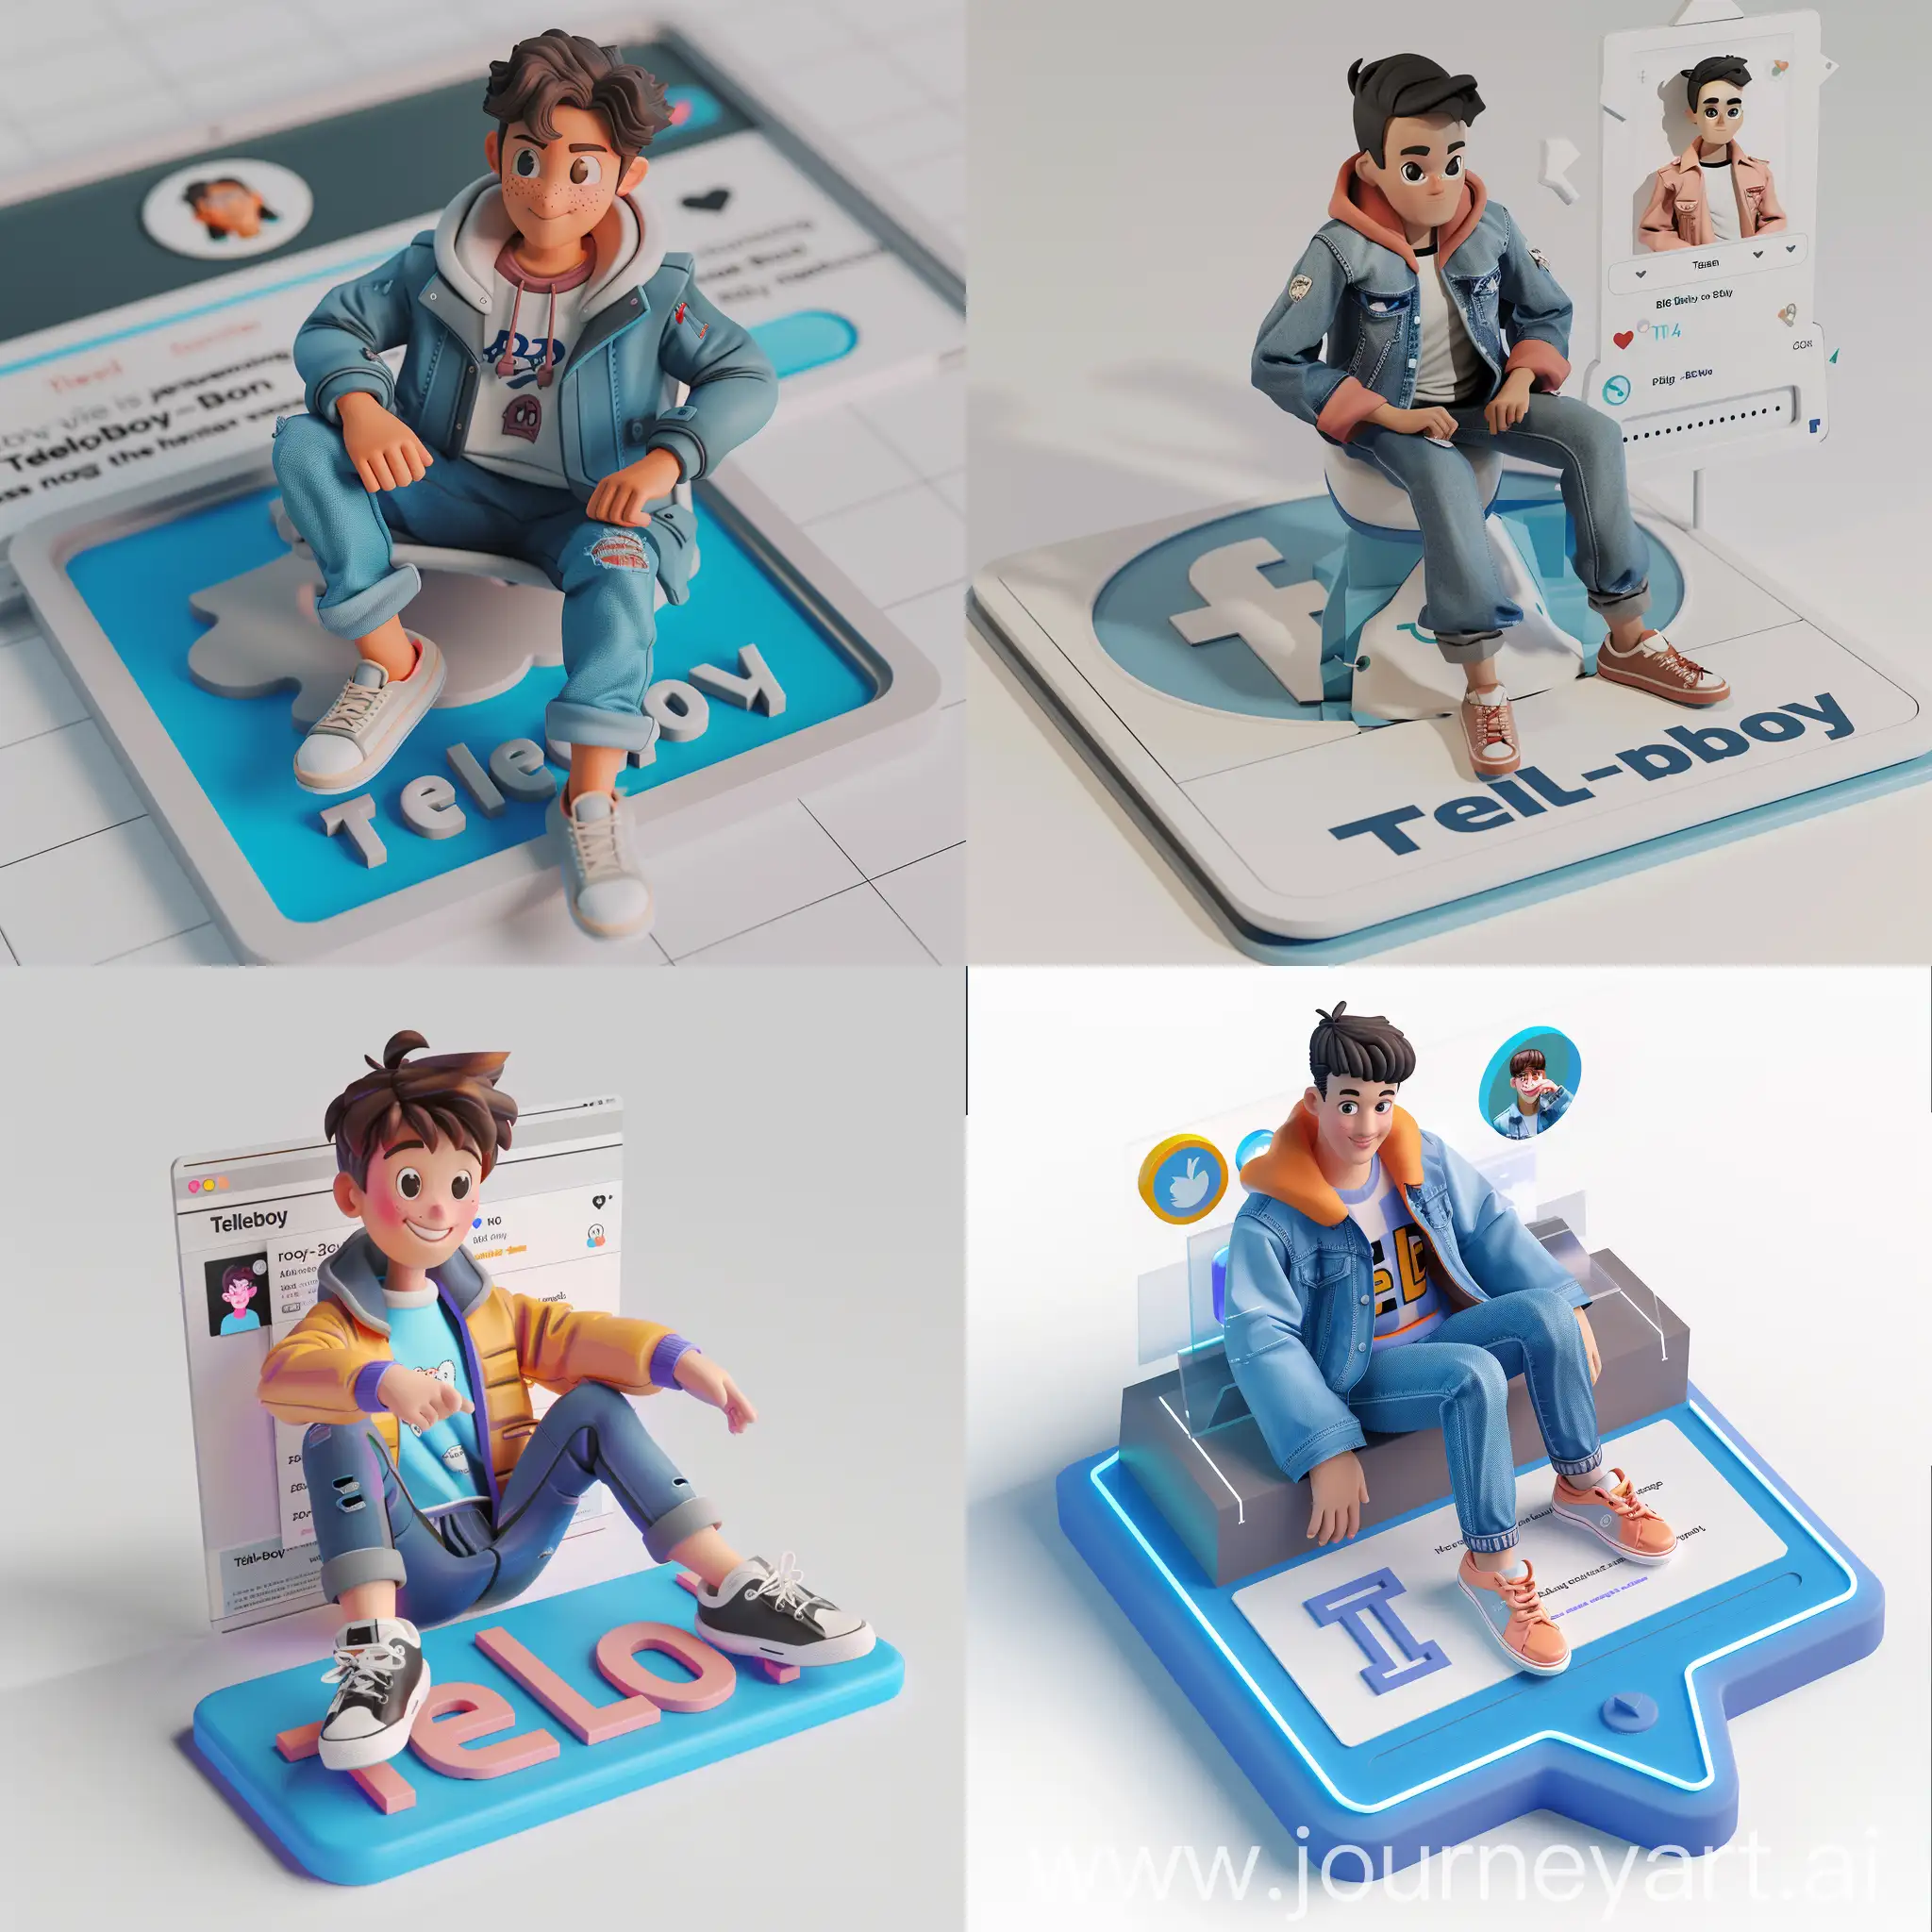 Create a 3D illustration of an animated character sitting casually on top of a social media logo "Telegram". The character must wear casual modern clothing such as jeans jacket and sneakers shoes. The background of the image is a social media profile page with a user name "Big-boy" and a profile picture that matches the animated character. Make sure the text is not misspelled.